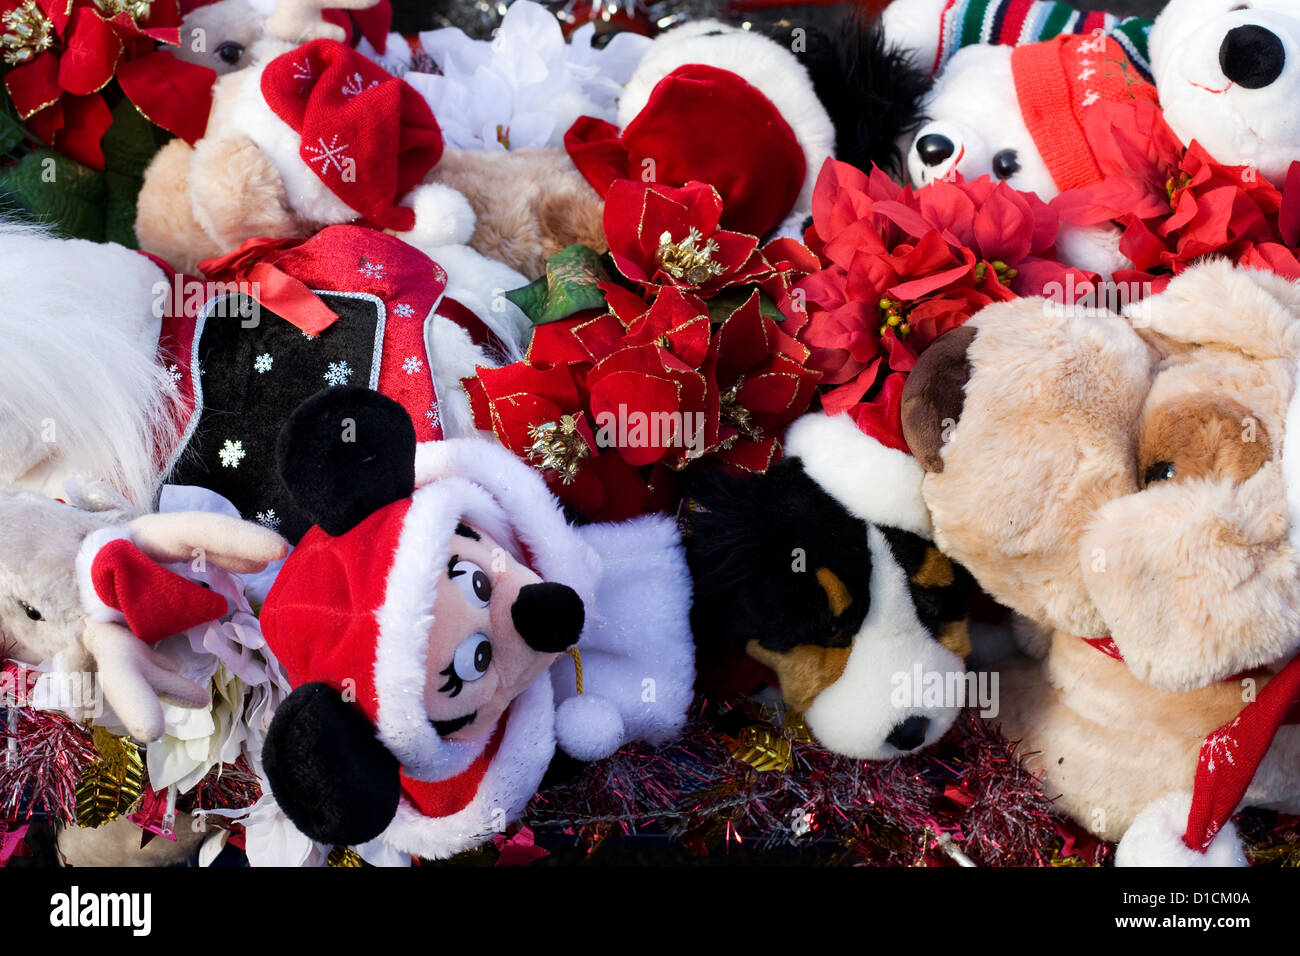 Different types of Cuddly Christmas Toys in a basket Stock Photo